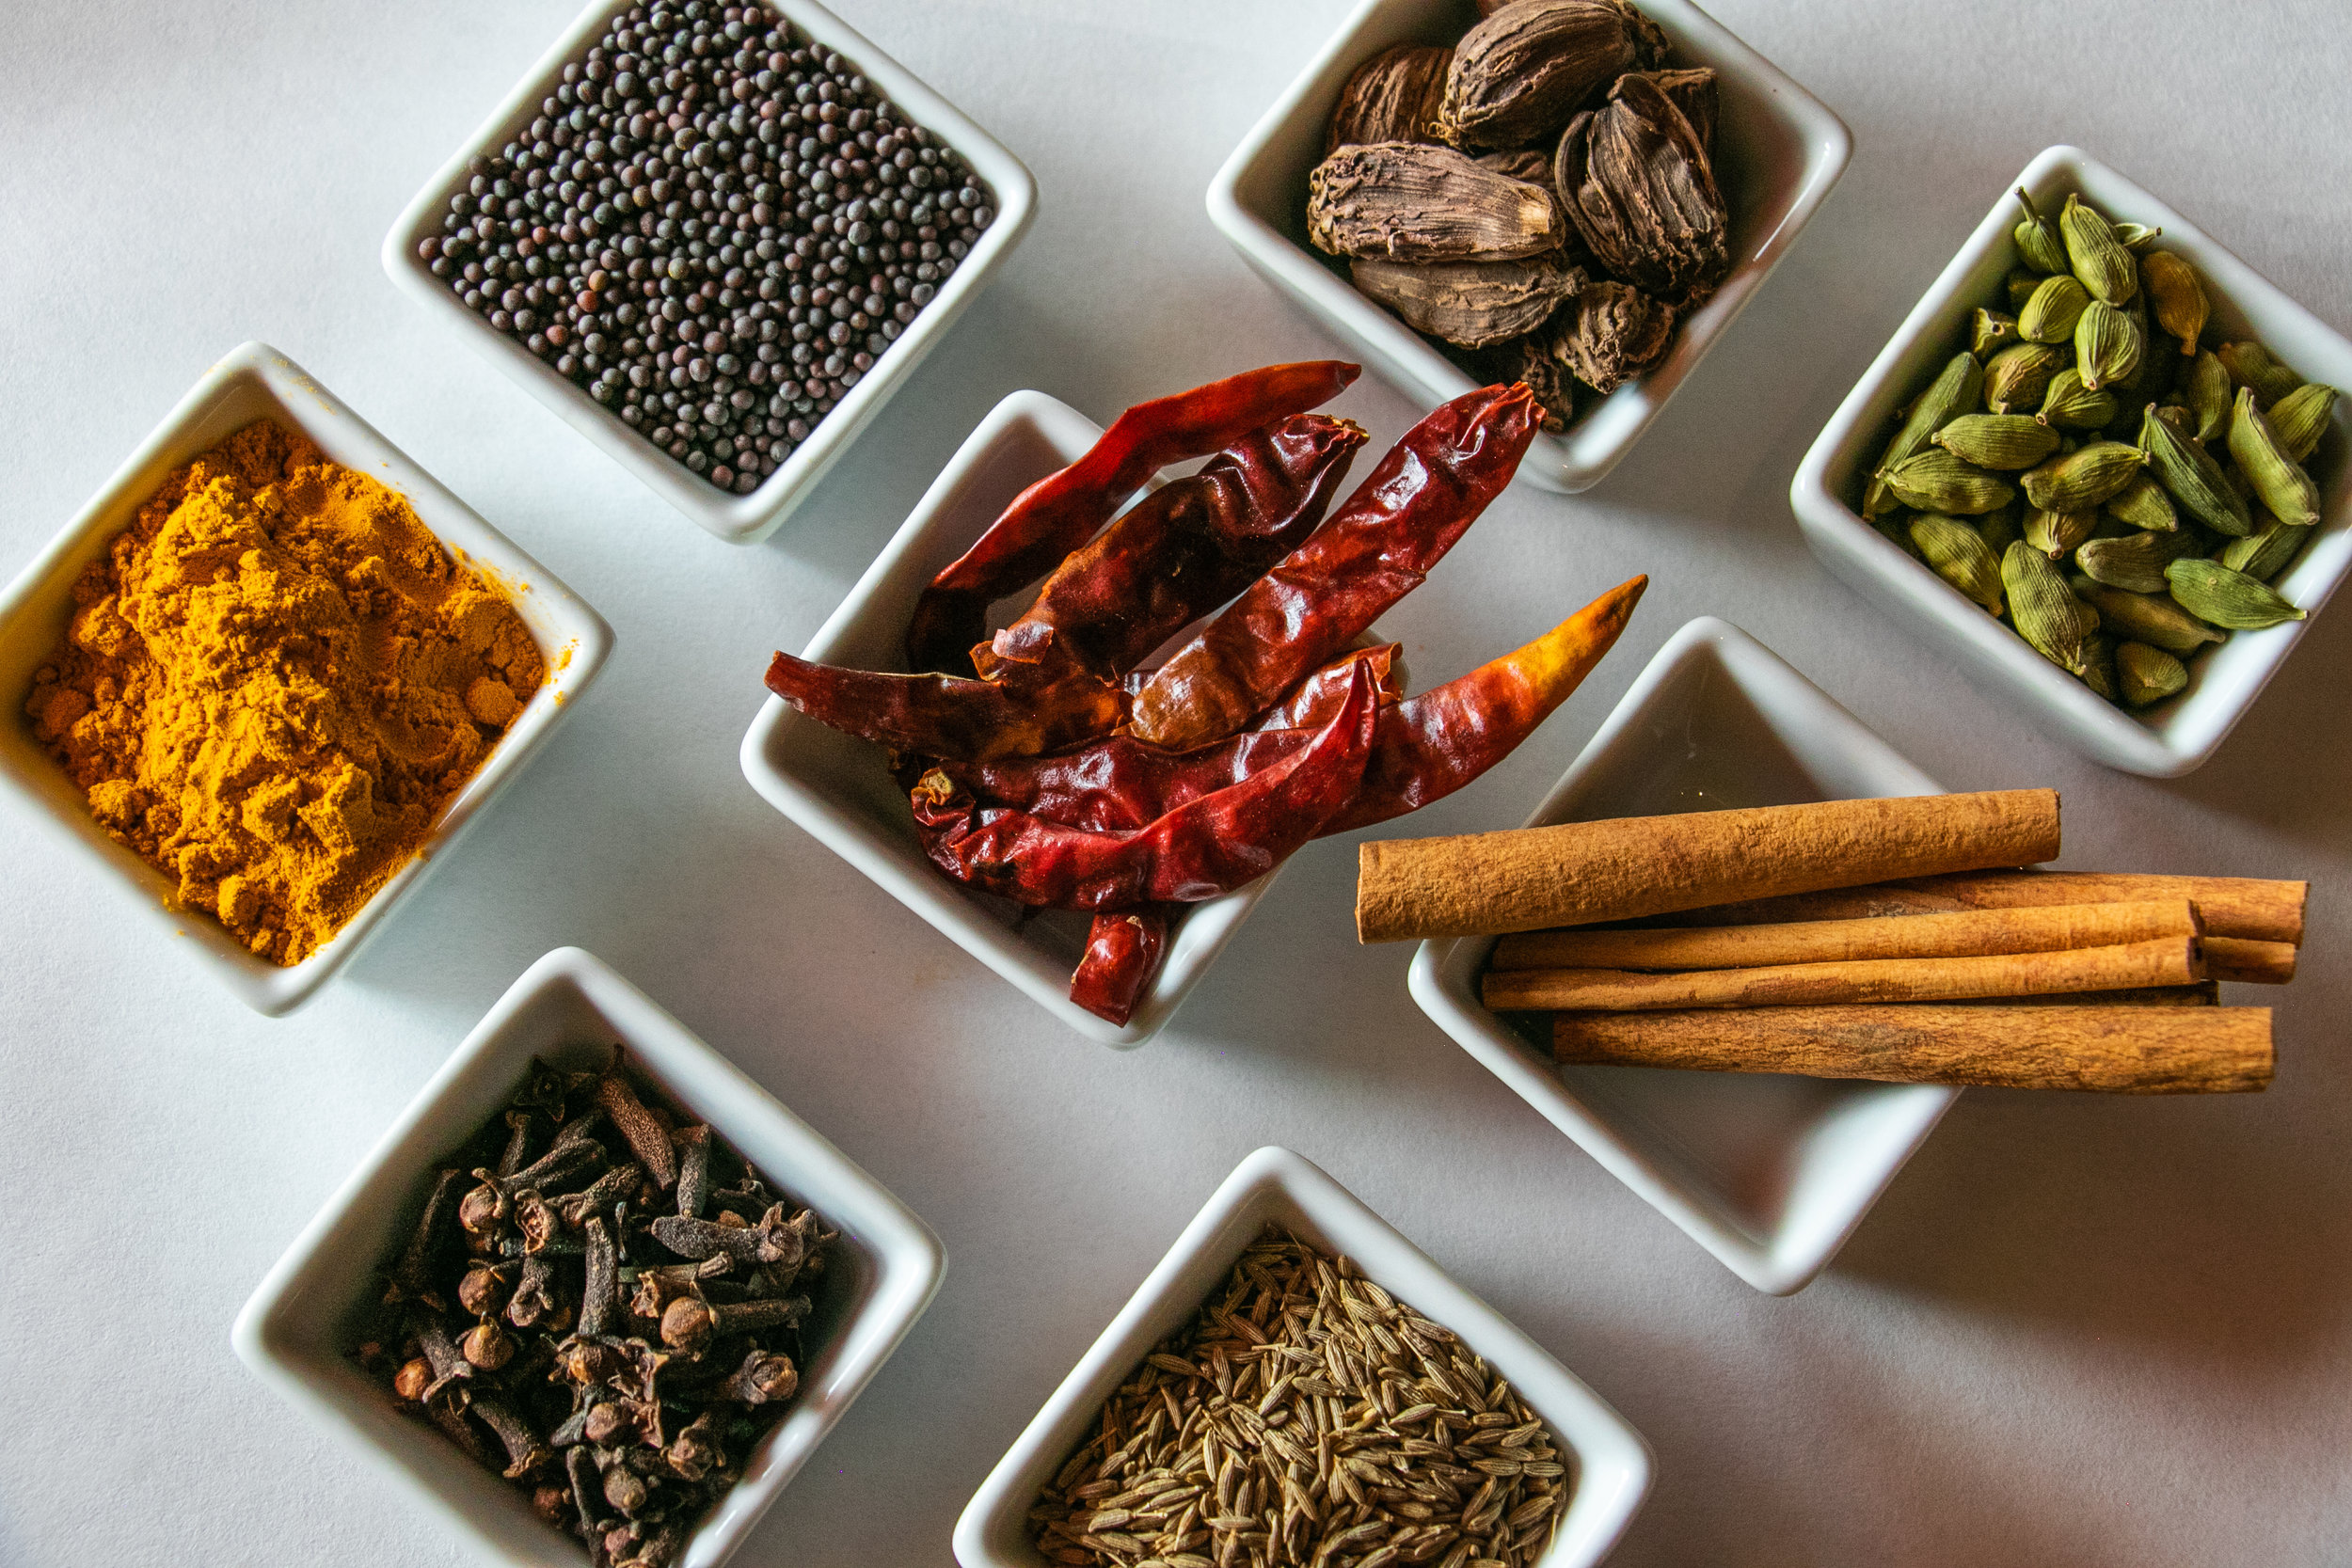  Some fresh spices that we use in our food. 